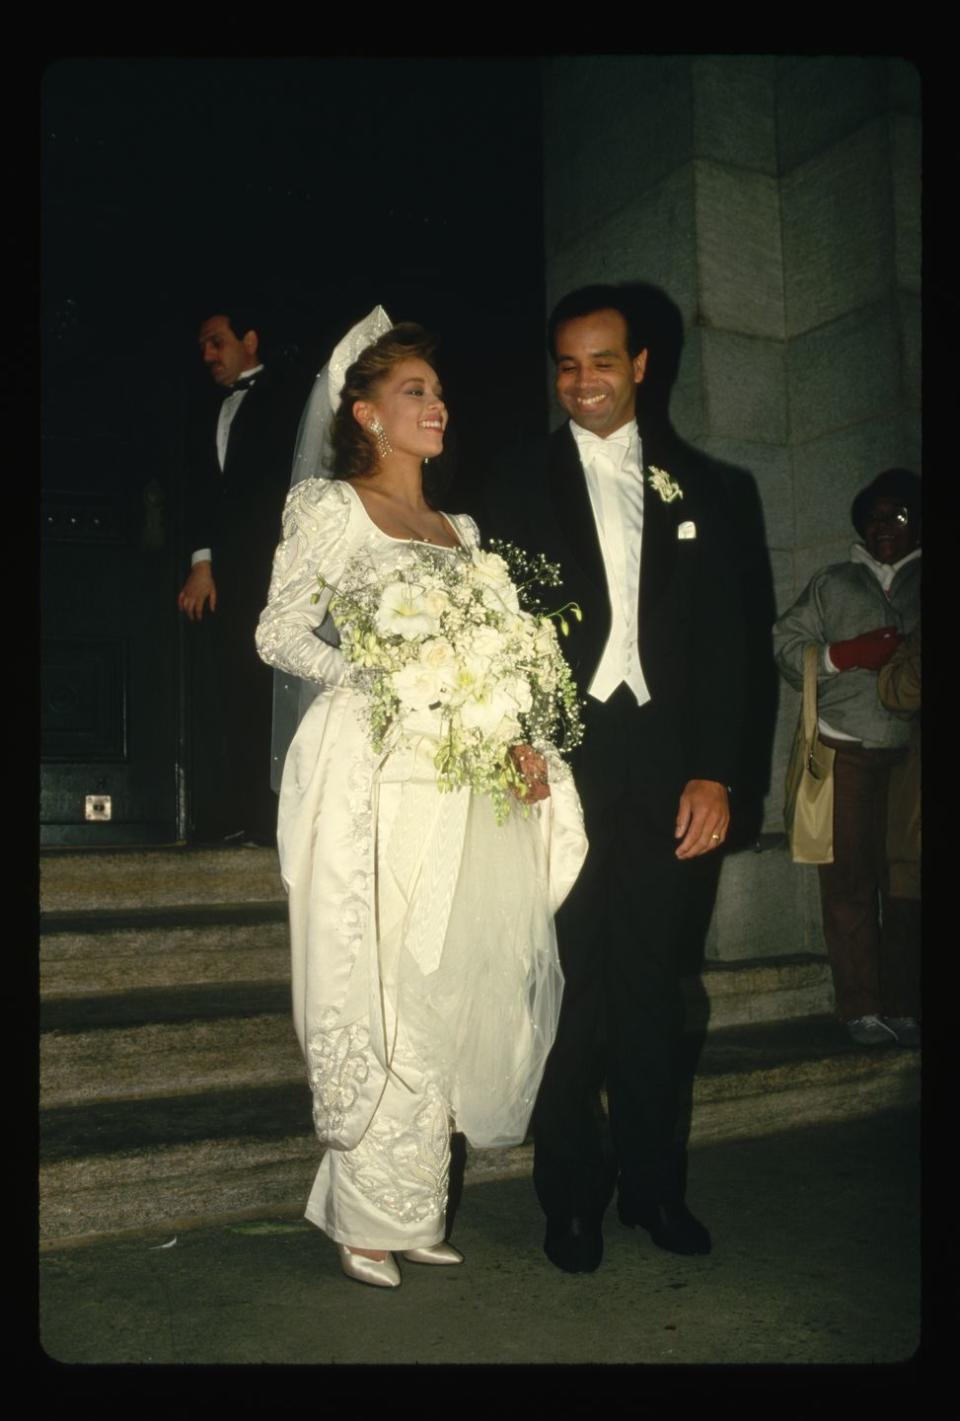 1987: Vanessa Williams marries the man hired to salvage her career in the wake of scandal